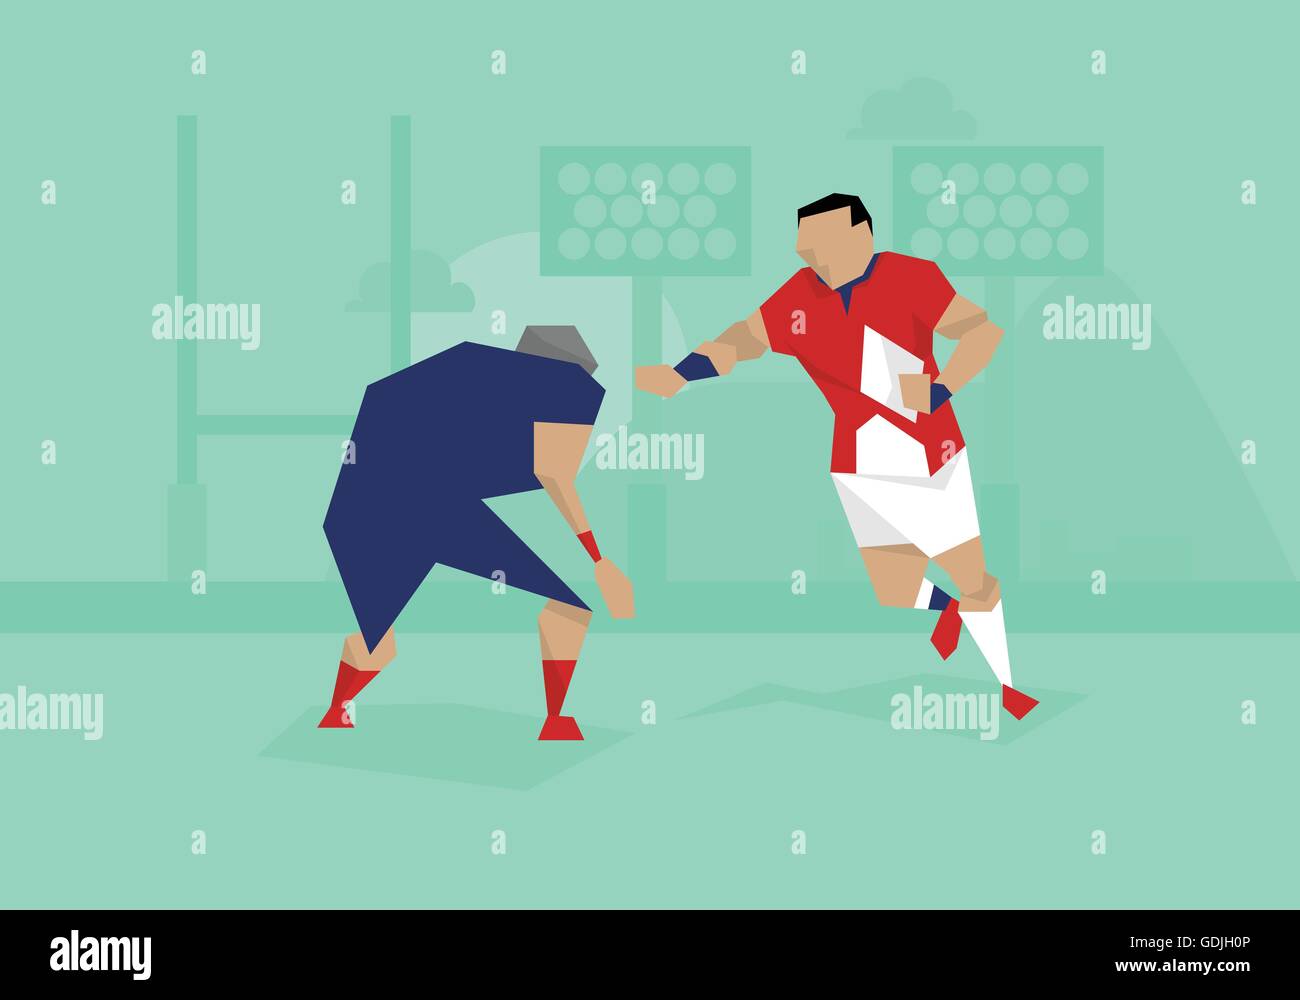 Illustration Of Male Soccer Rugby Competing In Match Stock Vector